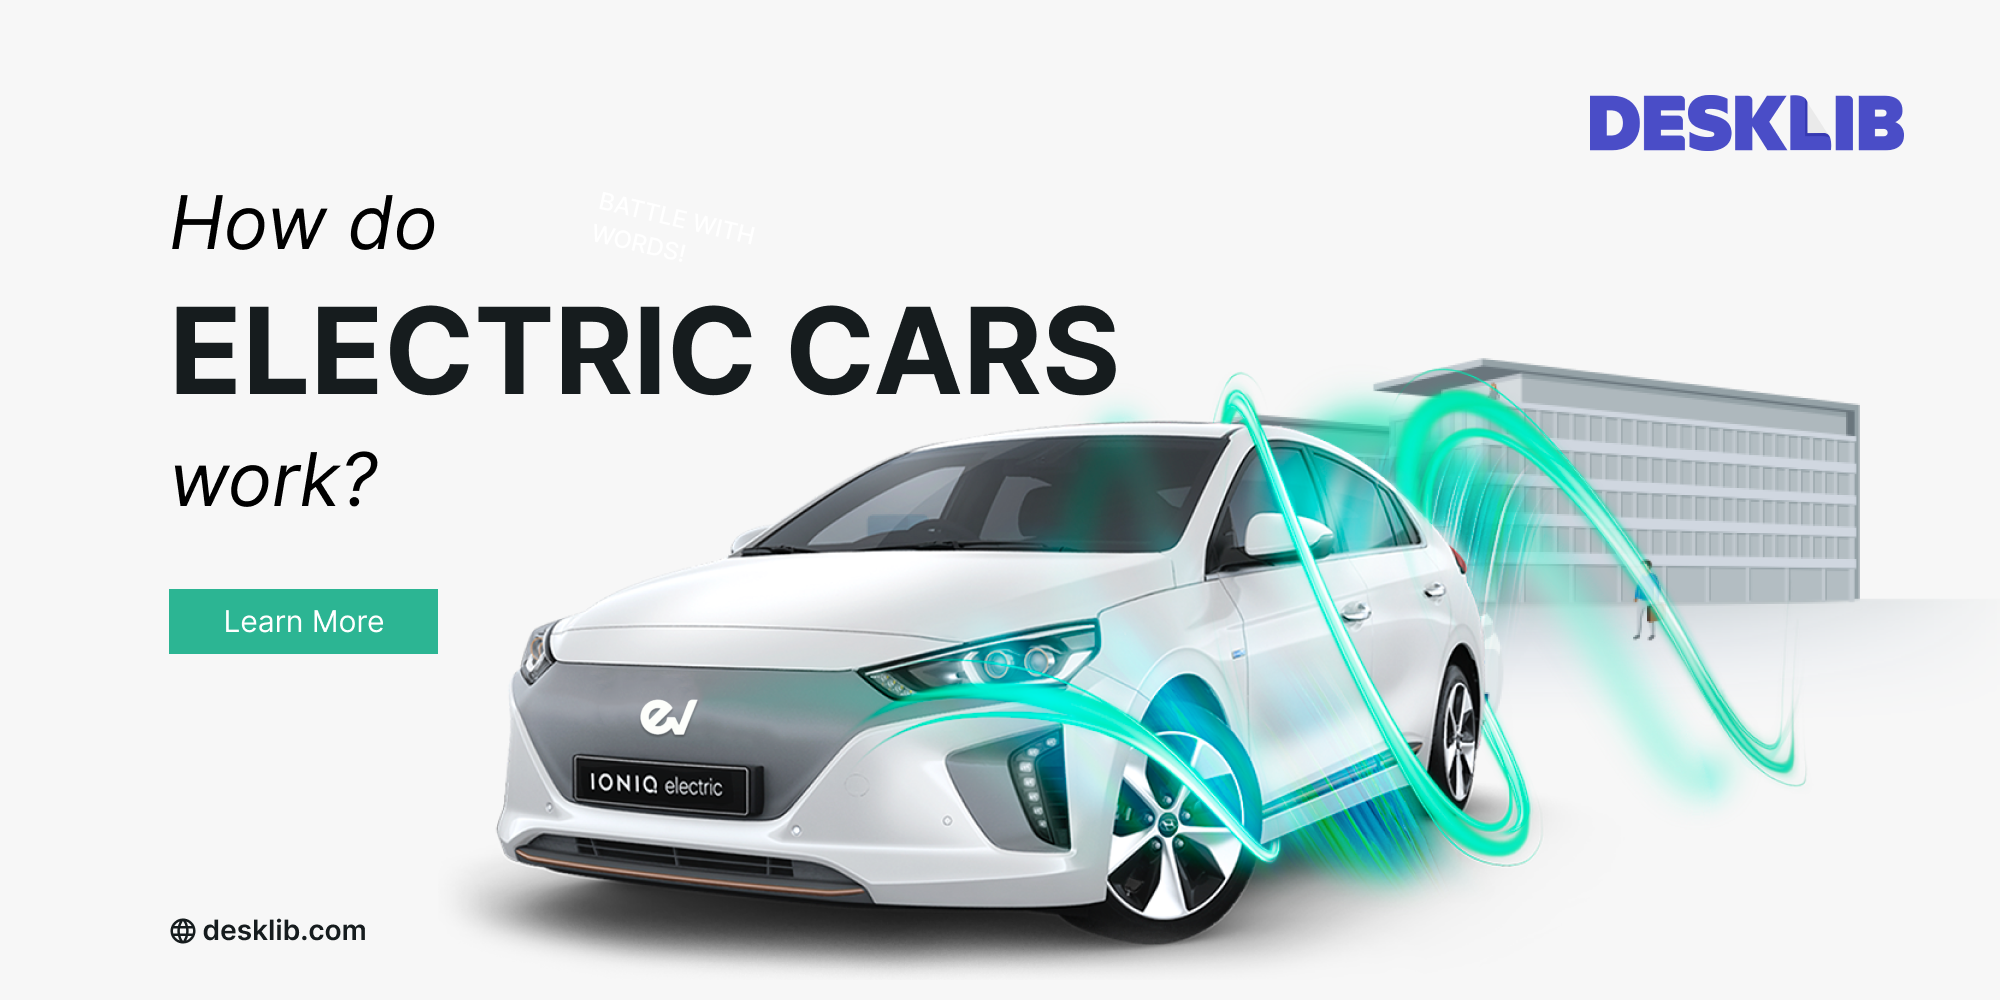 How do Electric Cars Work